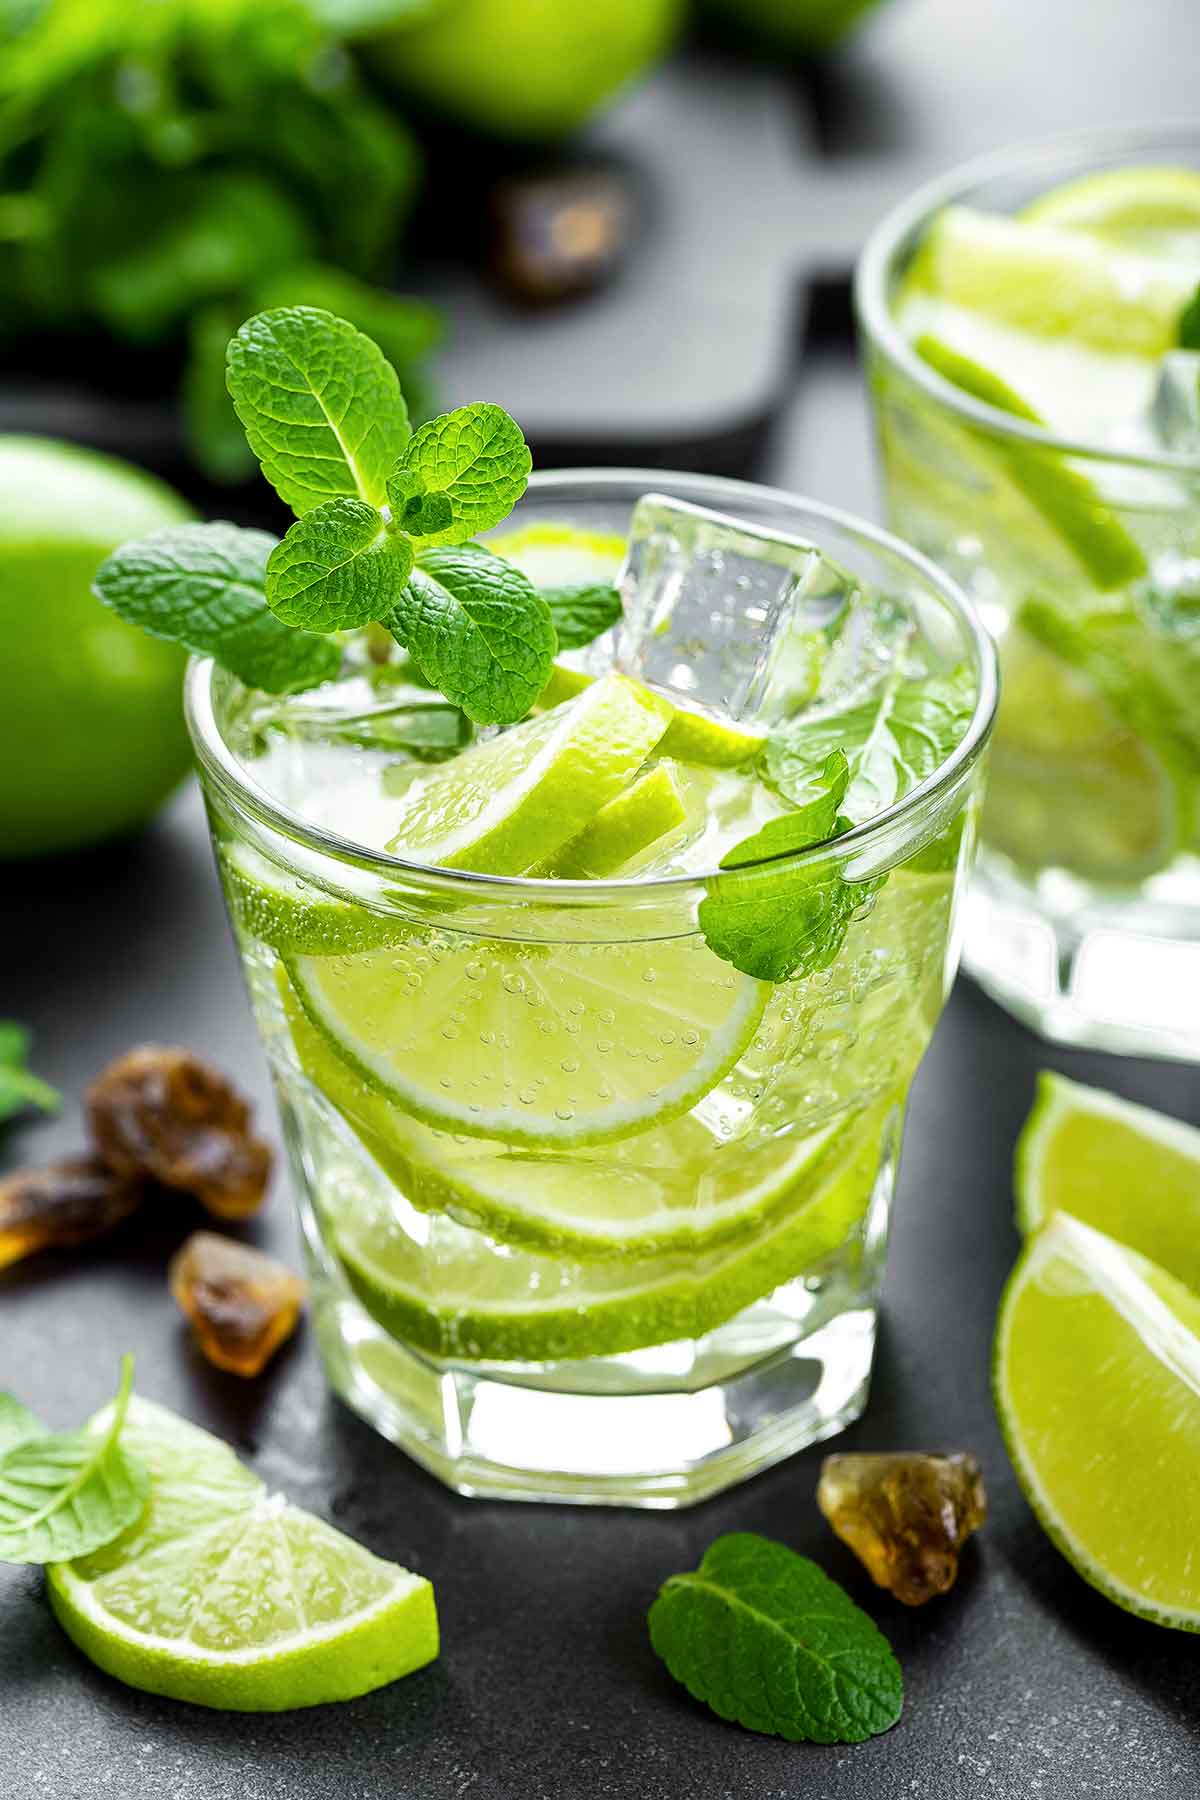 A glass of Mexican mojito with lime slices floating in it and a mint sprig garnish.